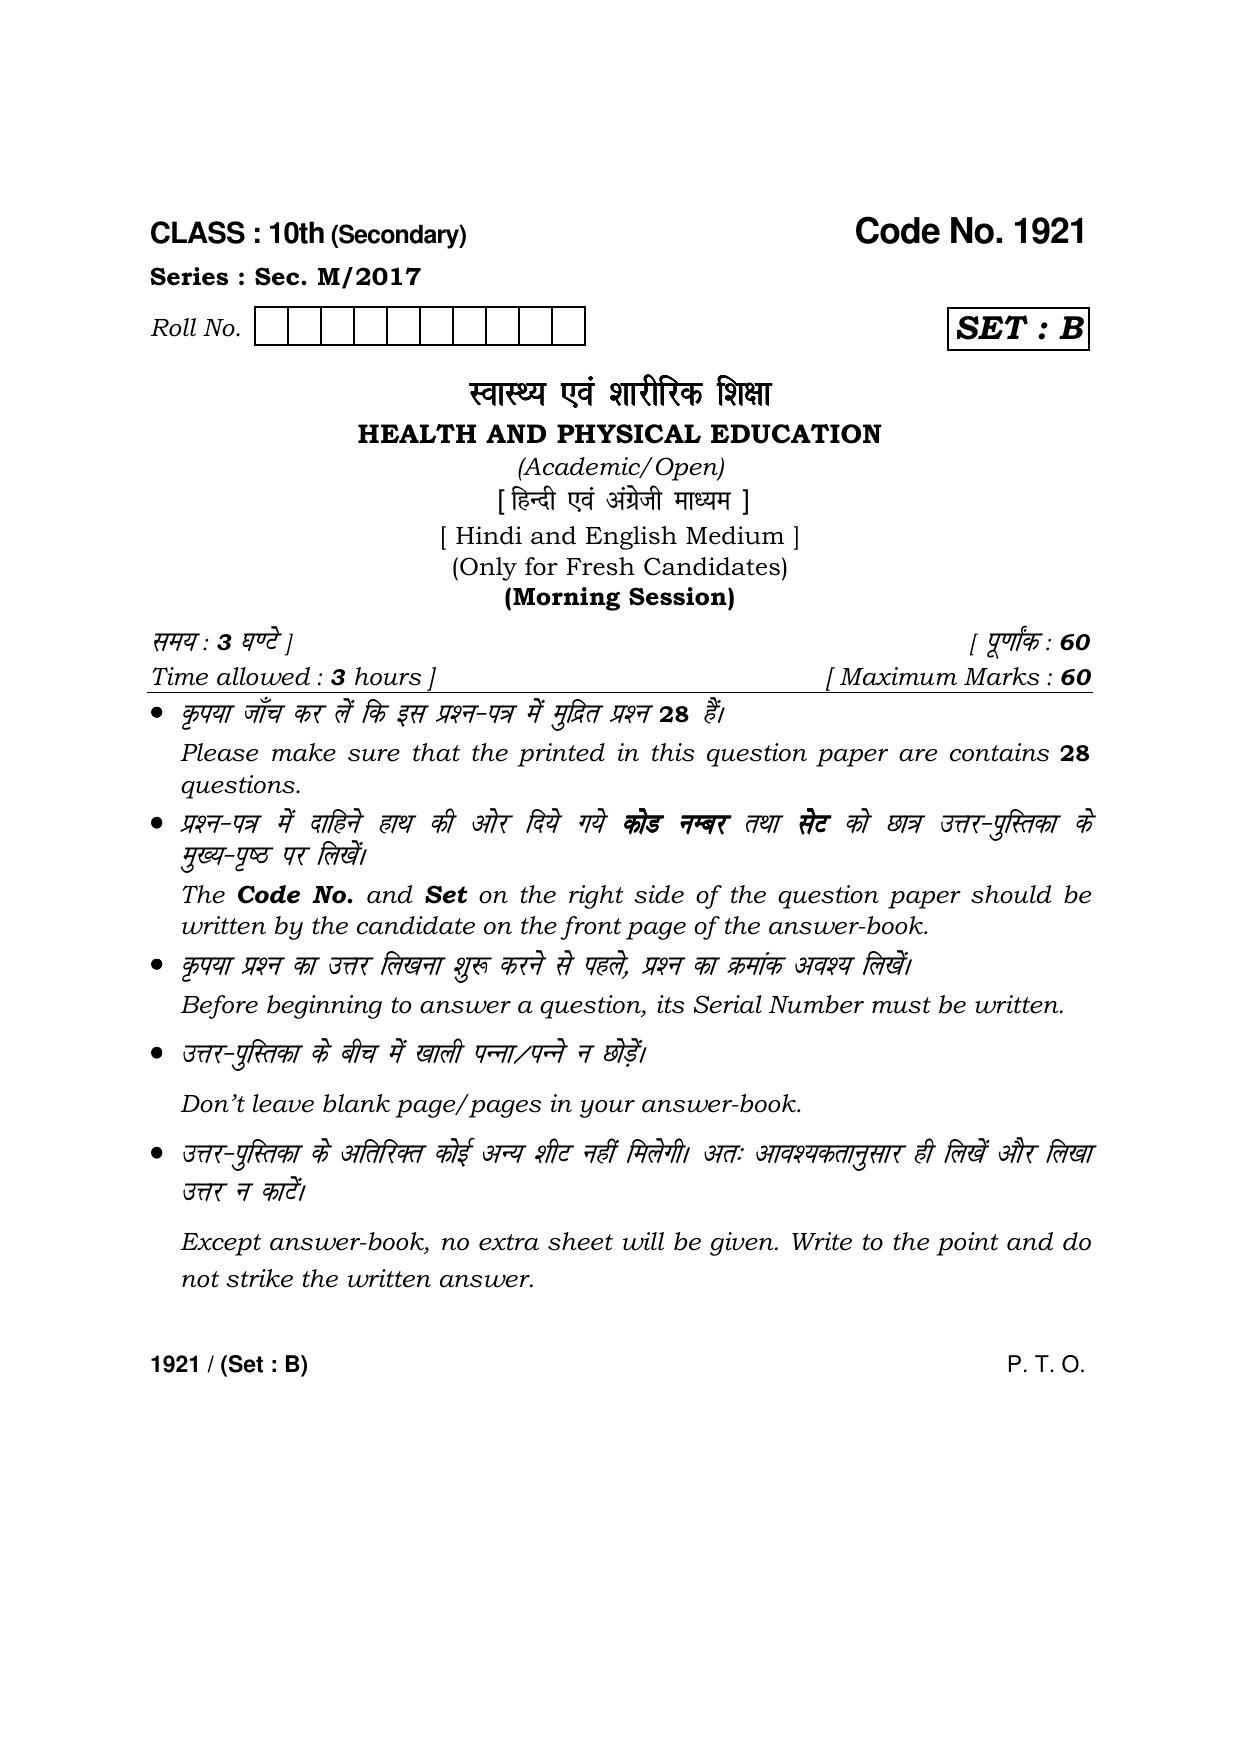 Haryana Board HBSE Class 10 Health & Physical Education -B 2017 Question Paper - Page 1